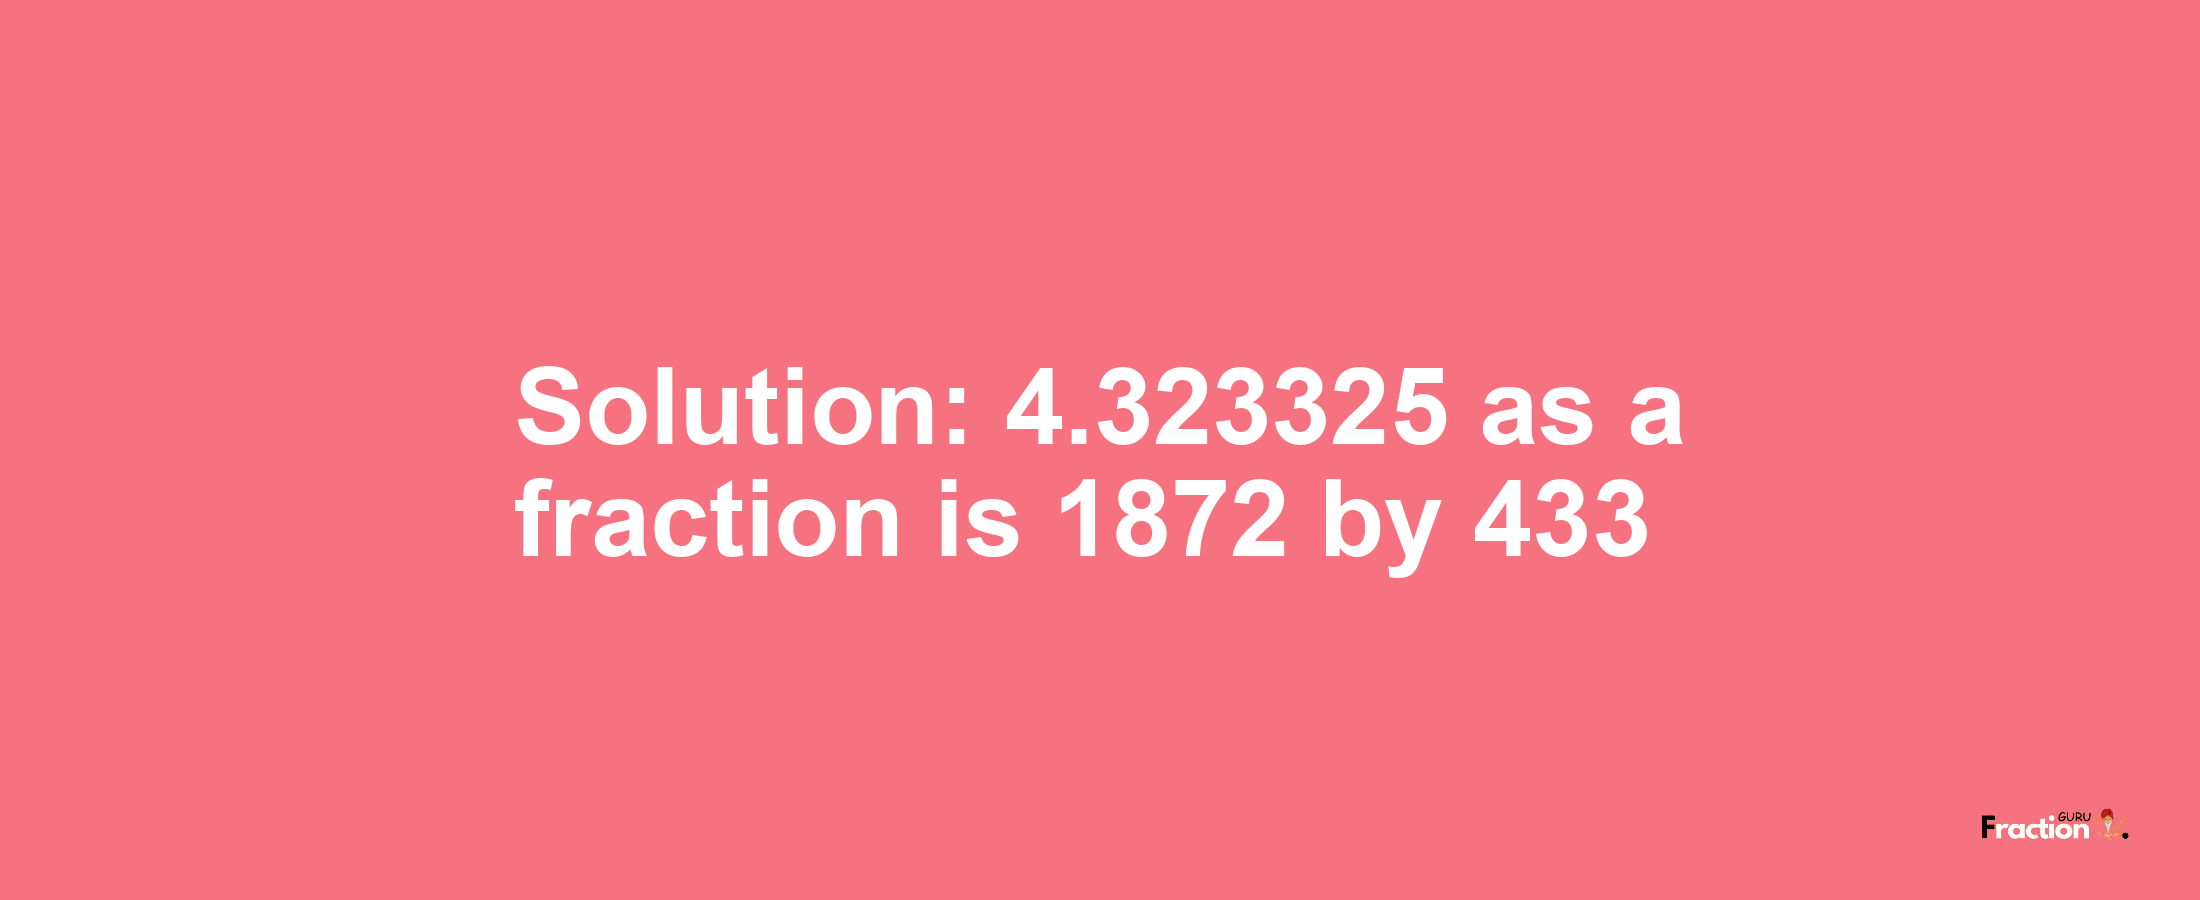 Solution:4.323325 as a fraction is 1872/433